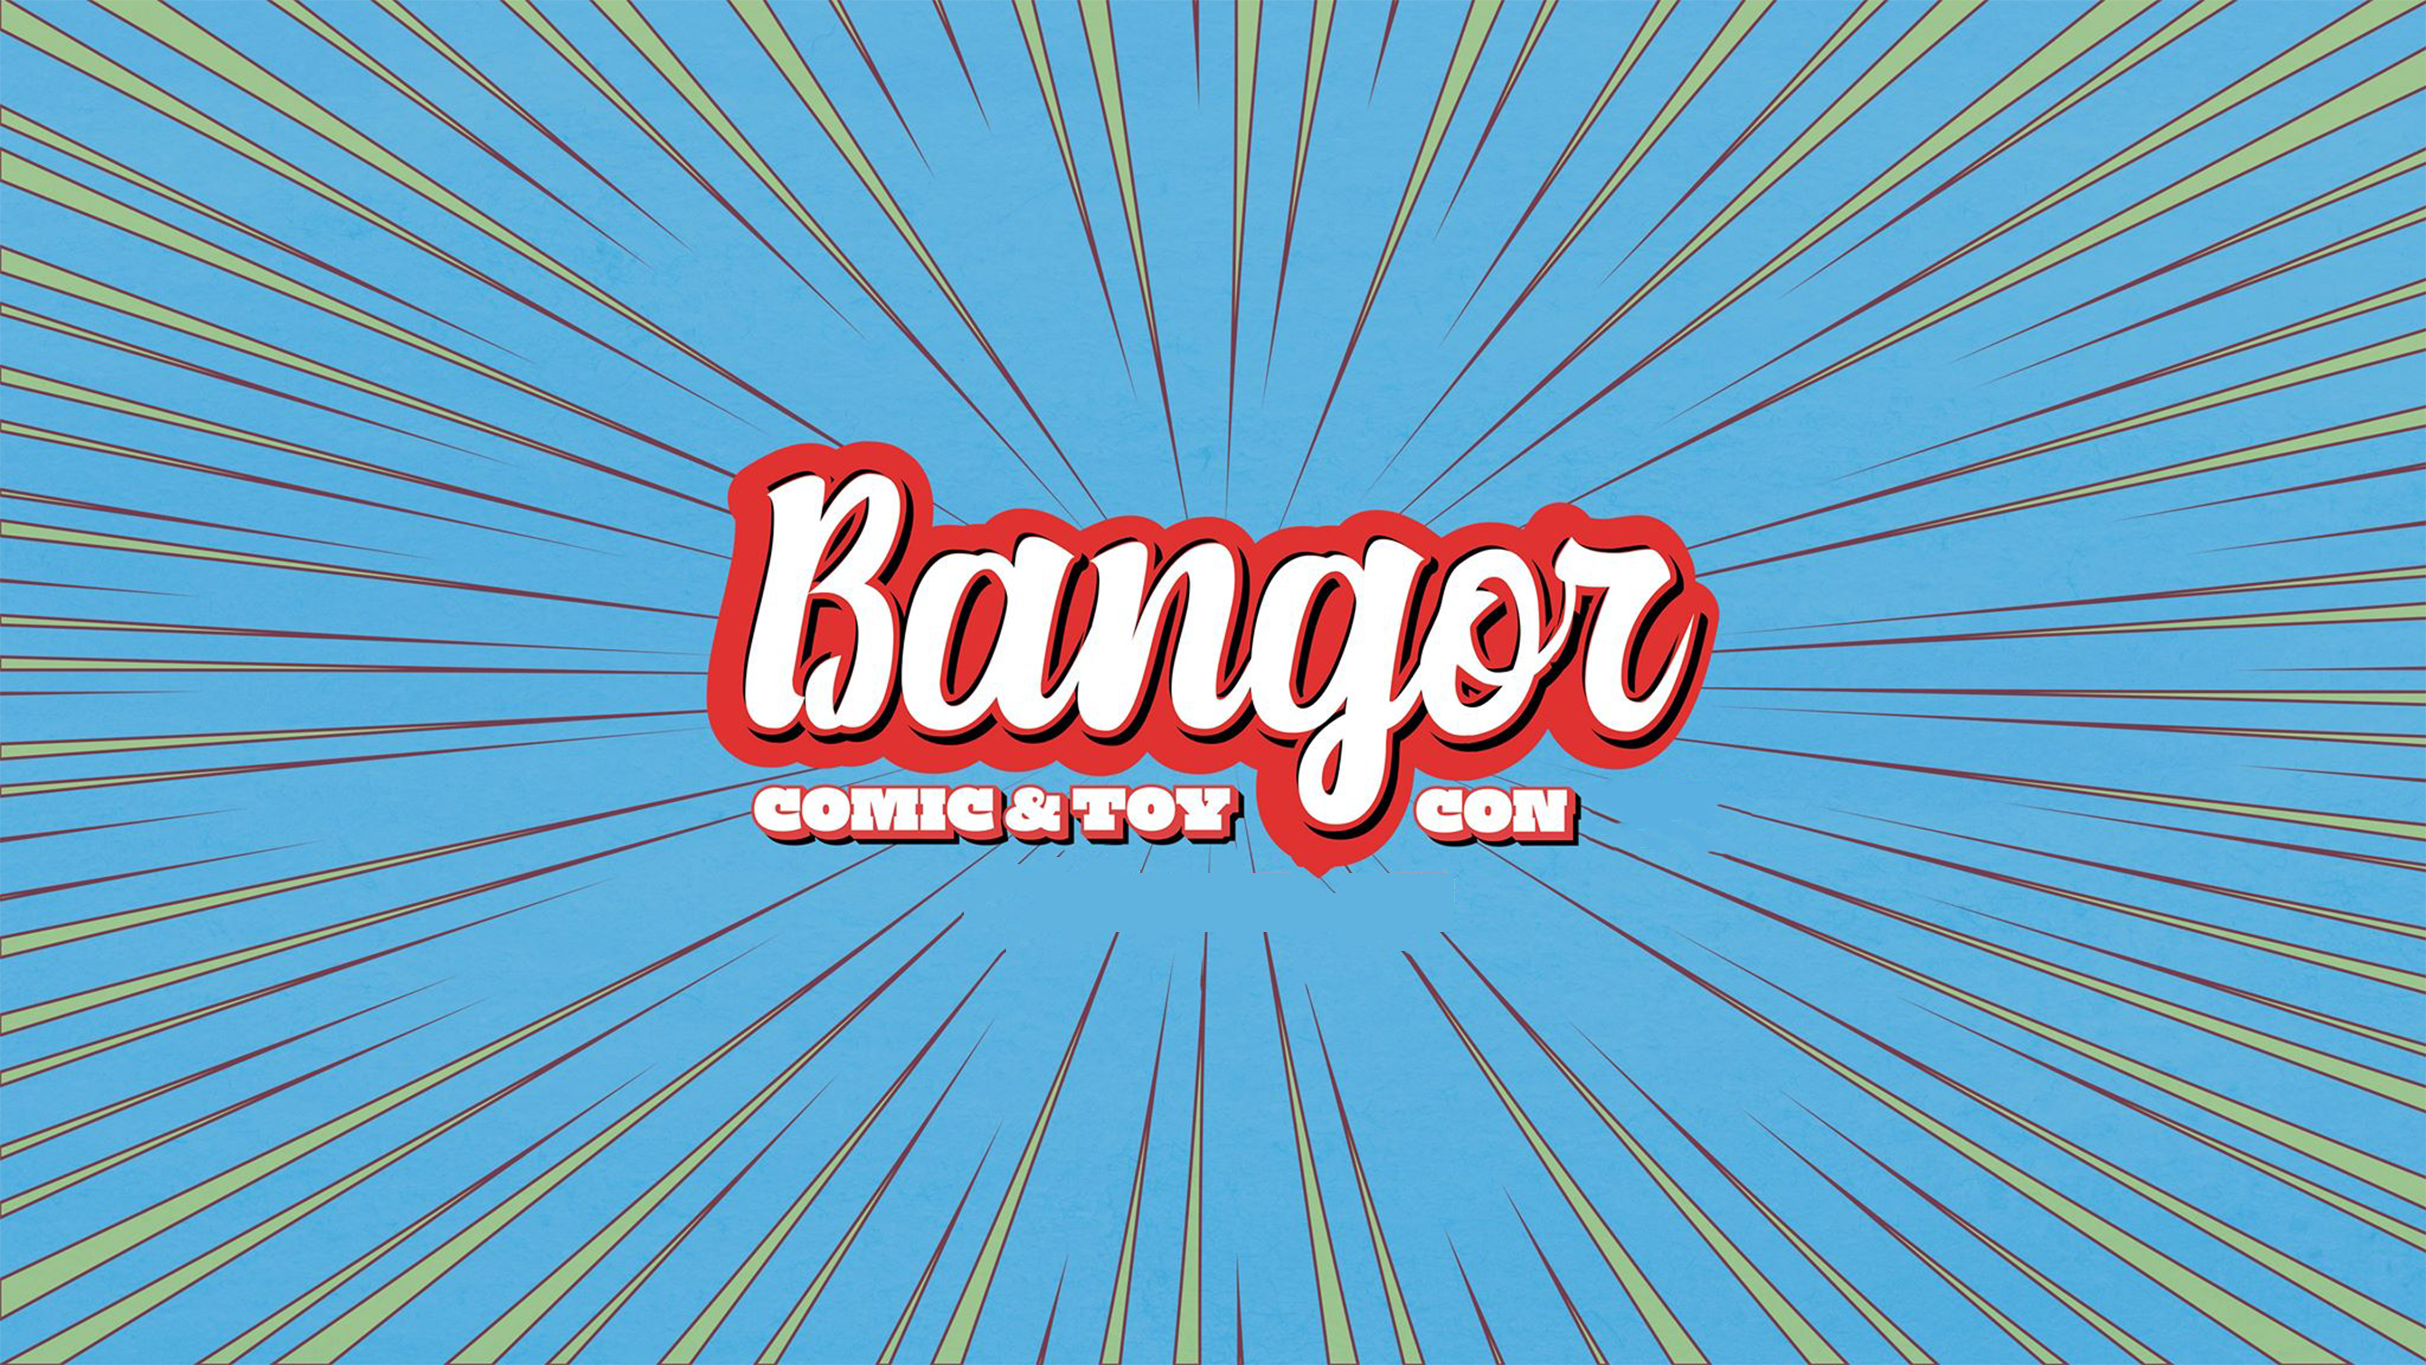 Bangor Comic and Toy Con - Friday (3:00 PM - 8:00 PM)